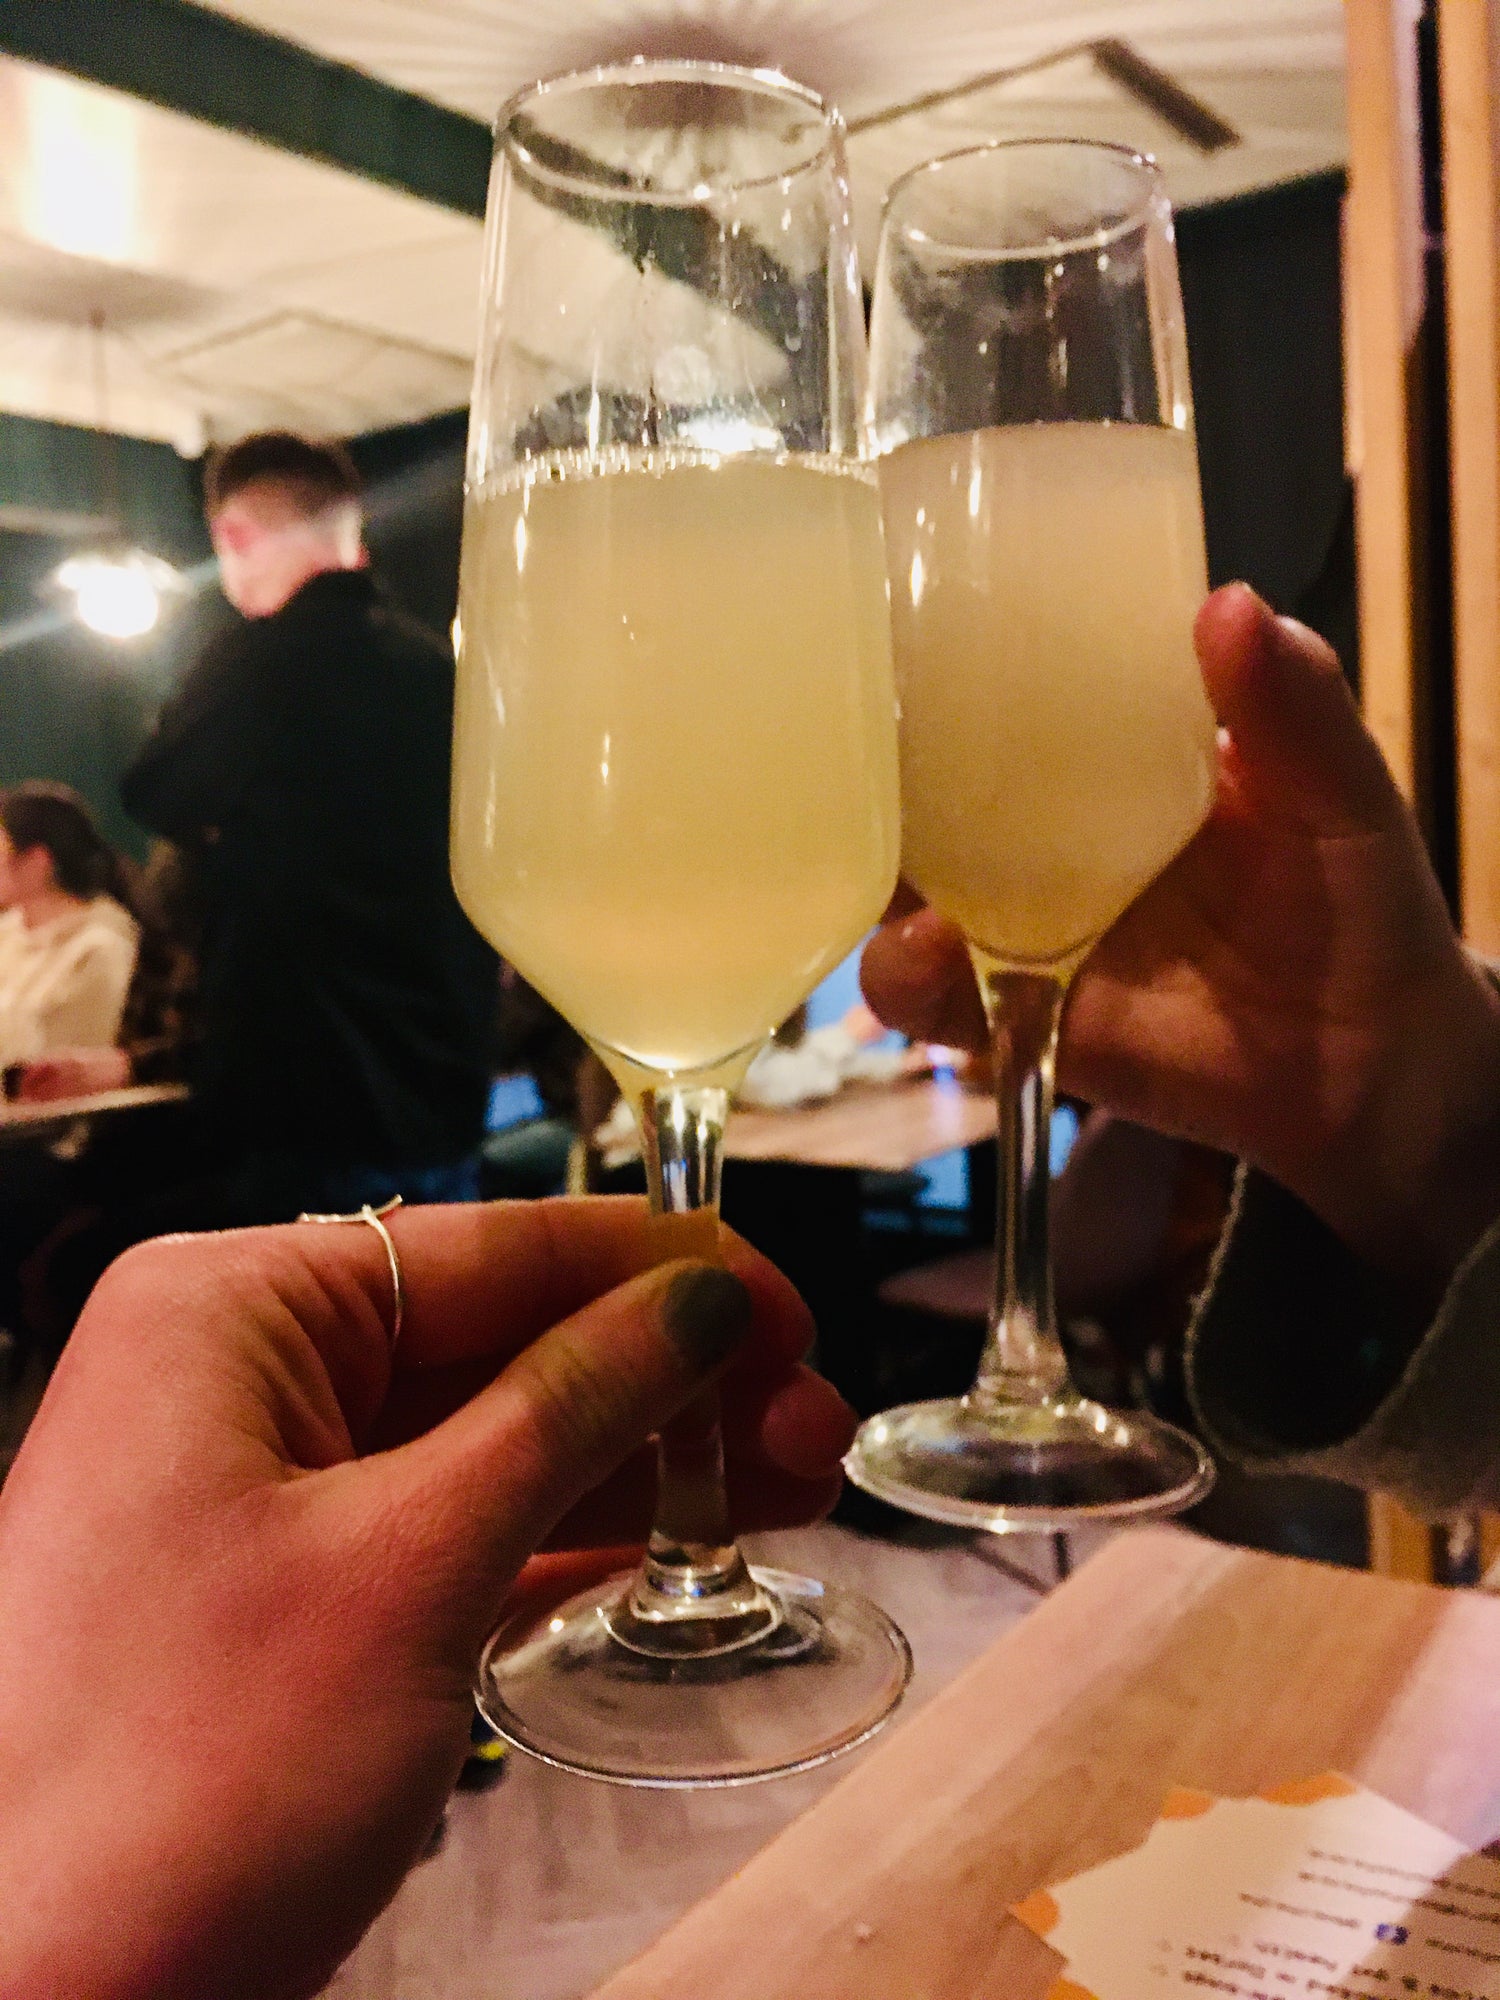 Kombucha in champagne glasses for a cheers with a good friend in a local alcohol free bar in bournemouth - BooChaCha